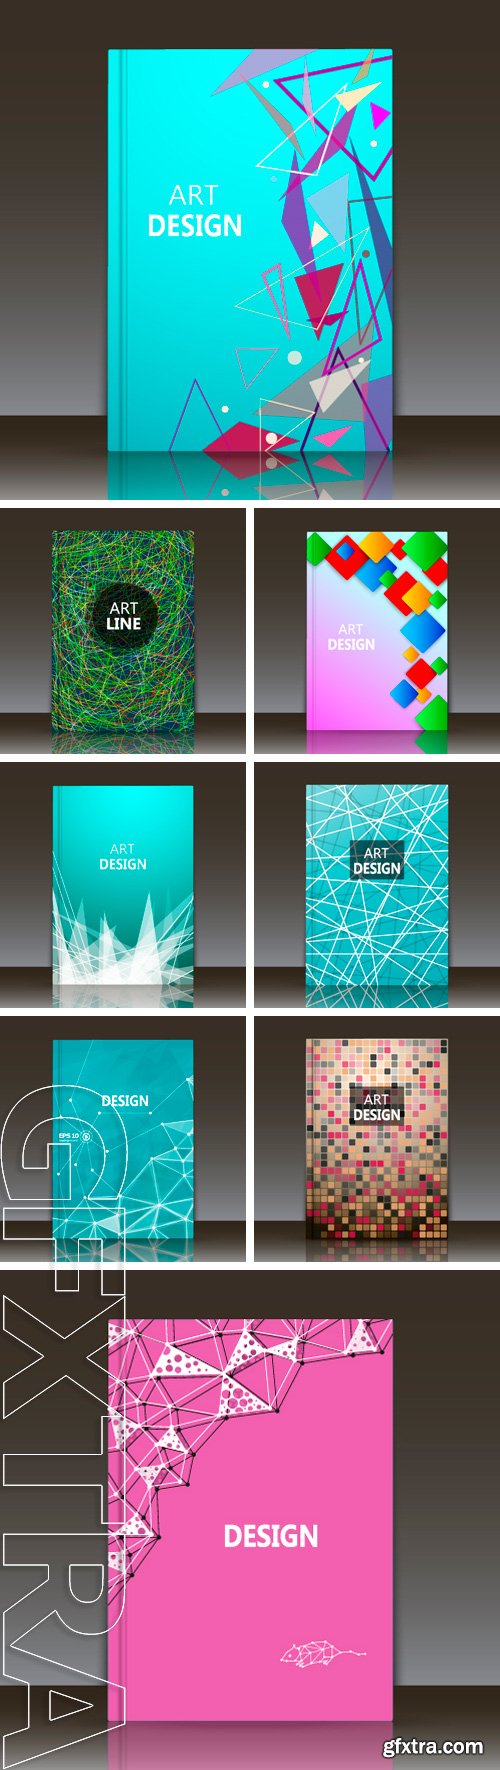 Stock Vectors - Abstract composition, azure brochure background, vector illustration